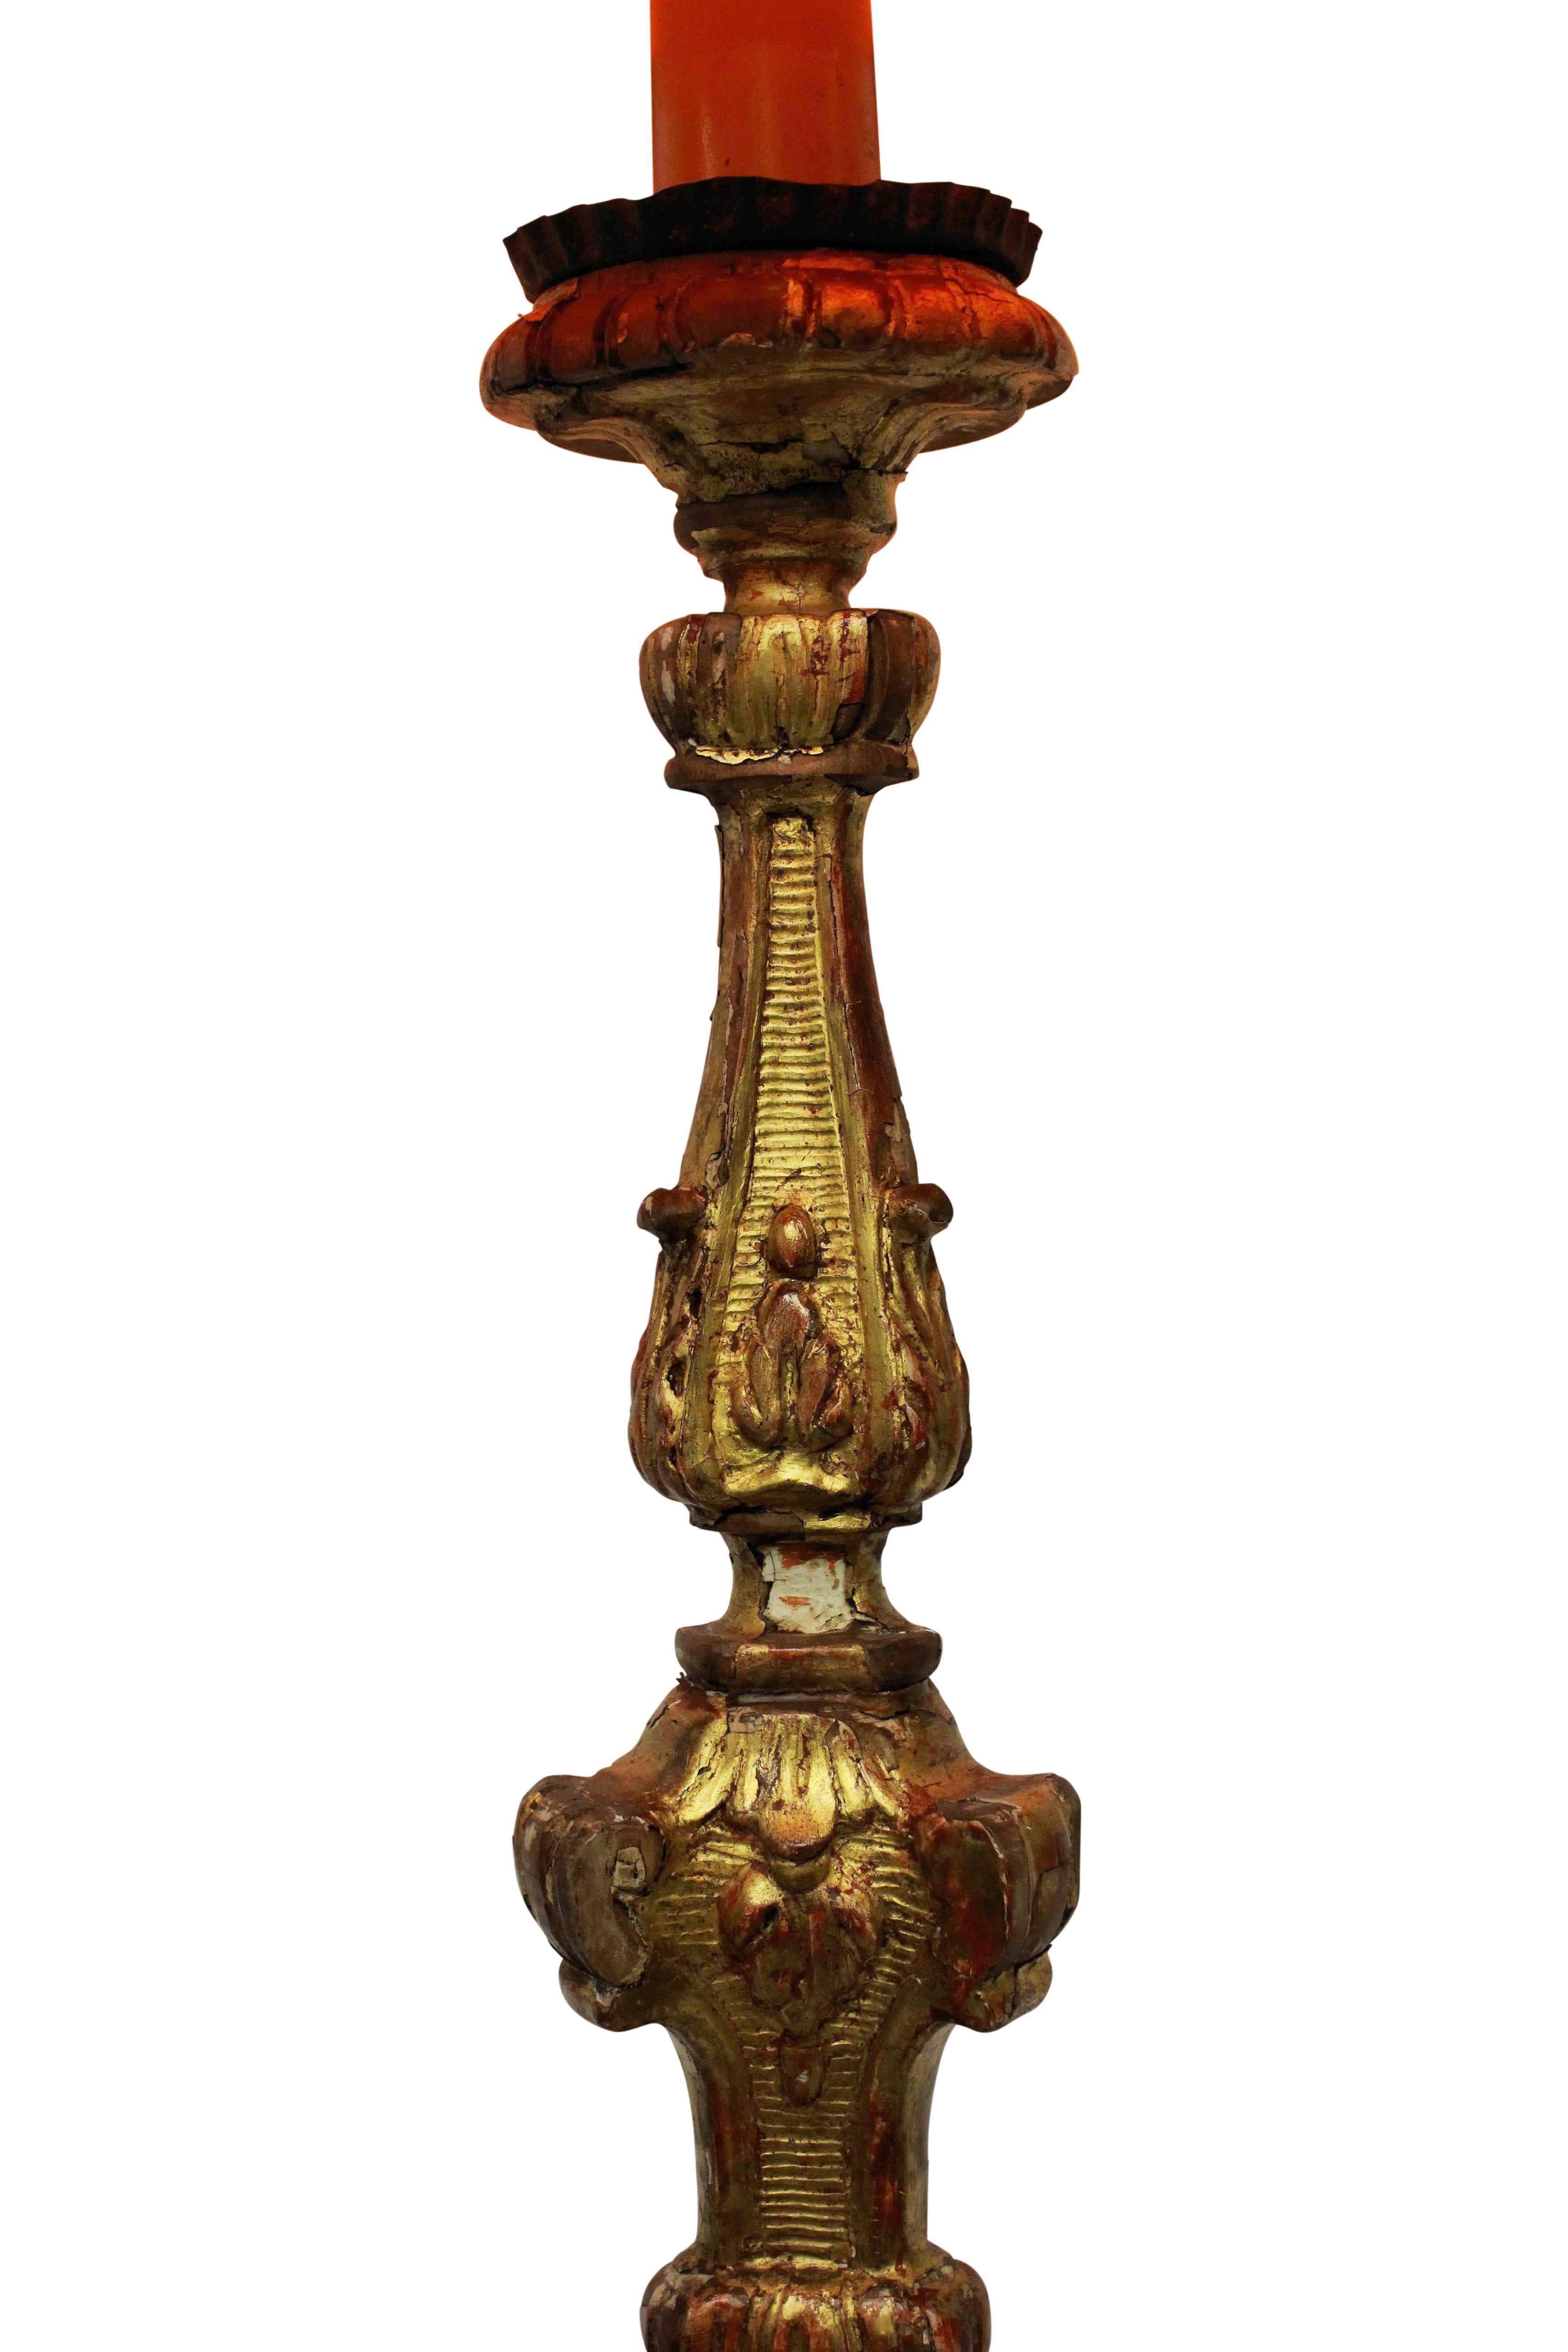 An Italian carved and water gilded Baroque candlestick now converted into a lamp.